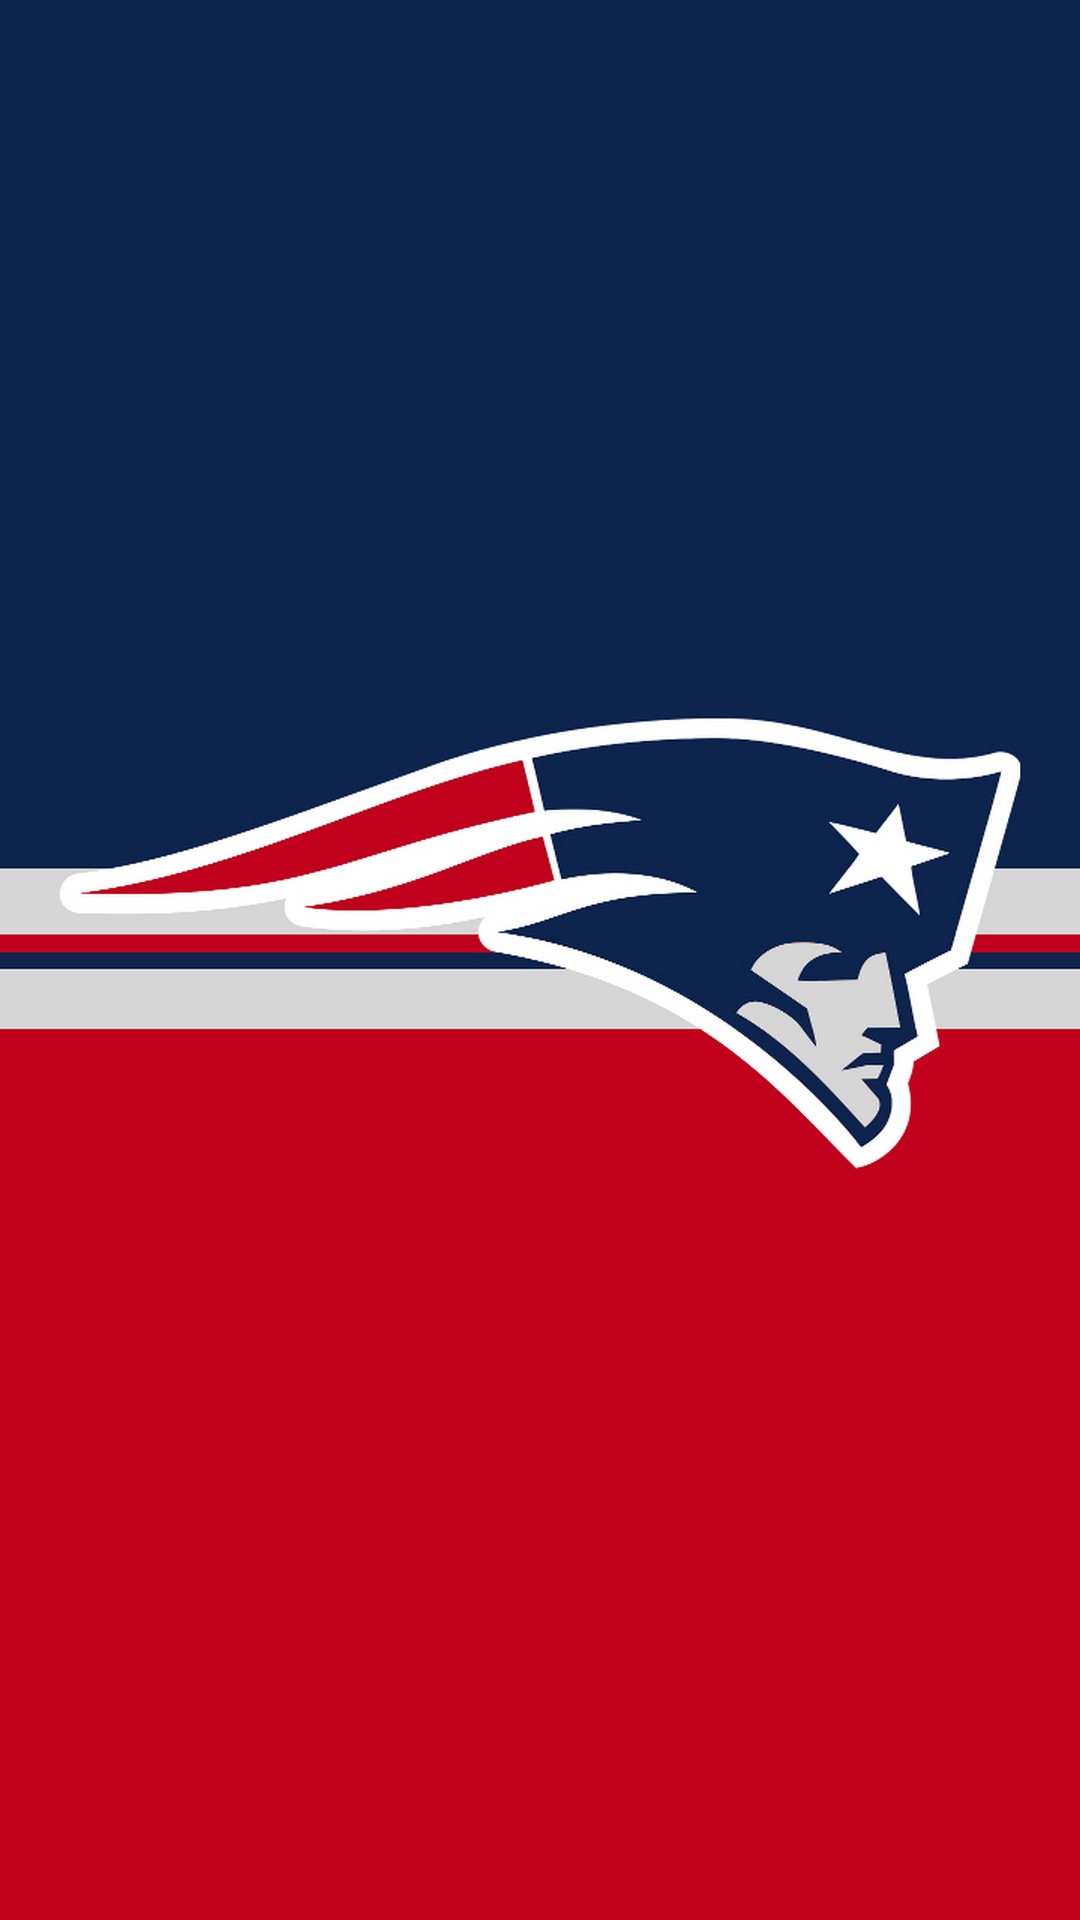 New England Patriots iPhone Wallpaper Lock Screen with high-resolution 1080x1920 pixel. Download and set as wallpaper for Apple iPhone X, XS Max, XR, 8, 7, 6, SE, iPad, Android